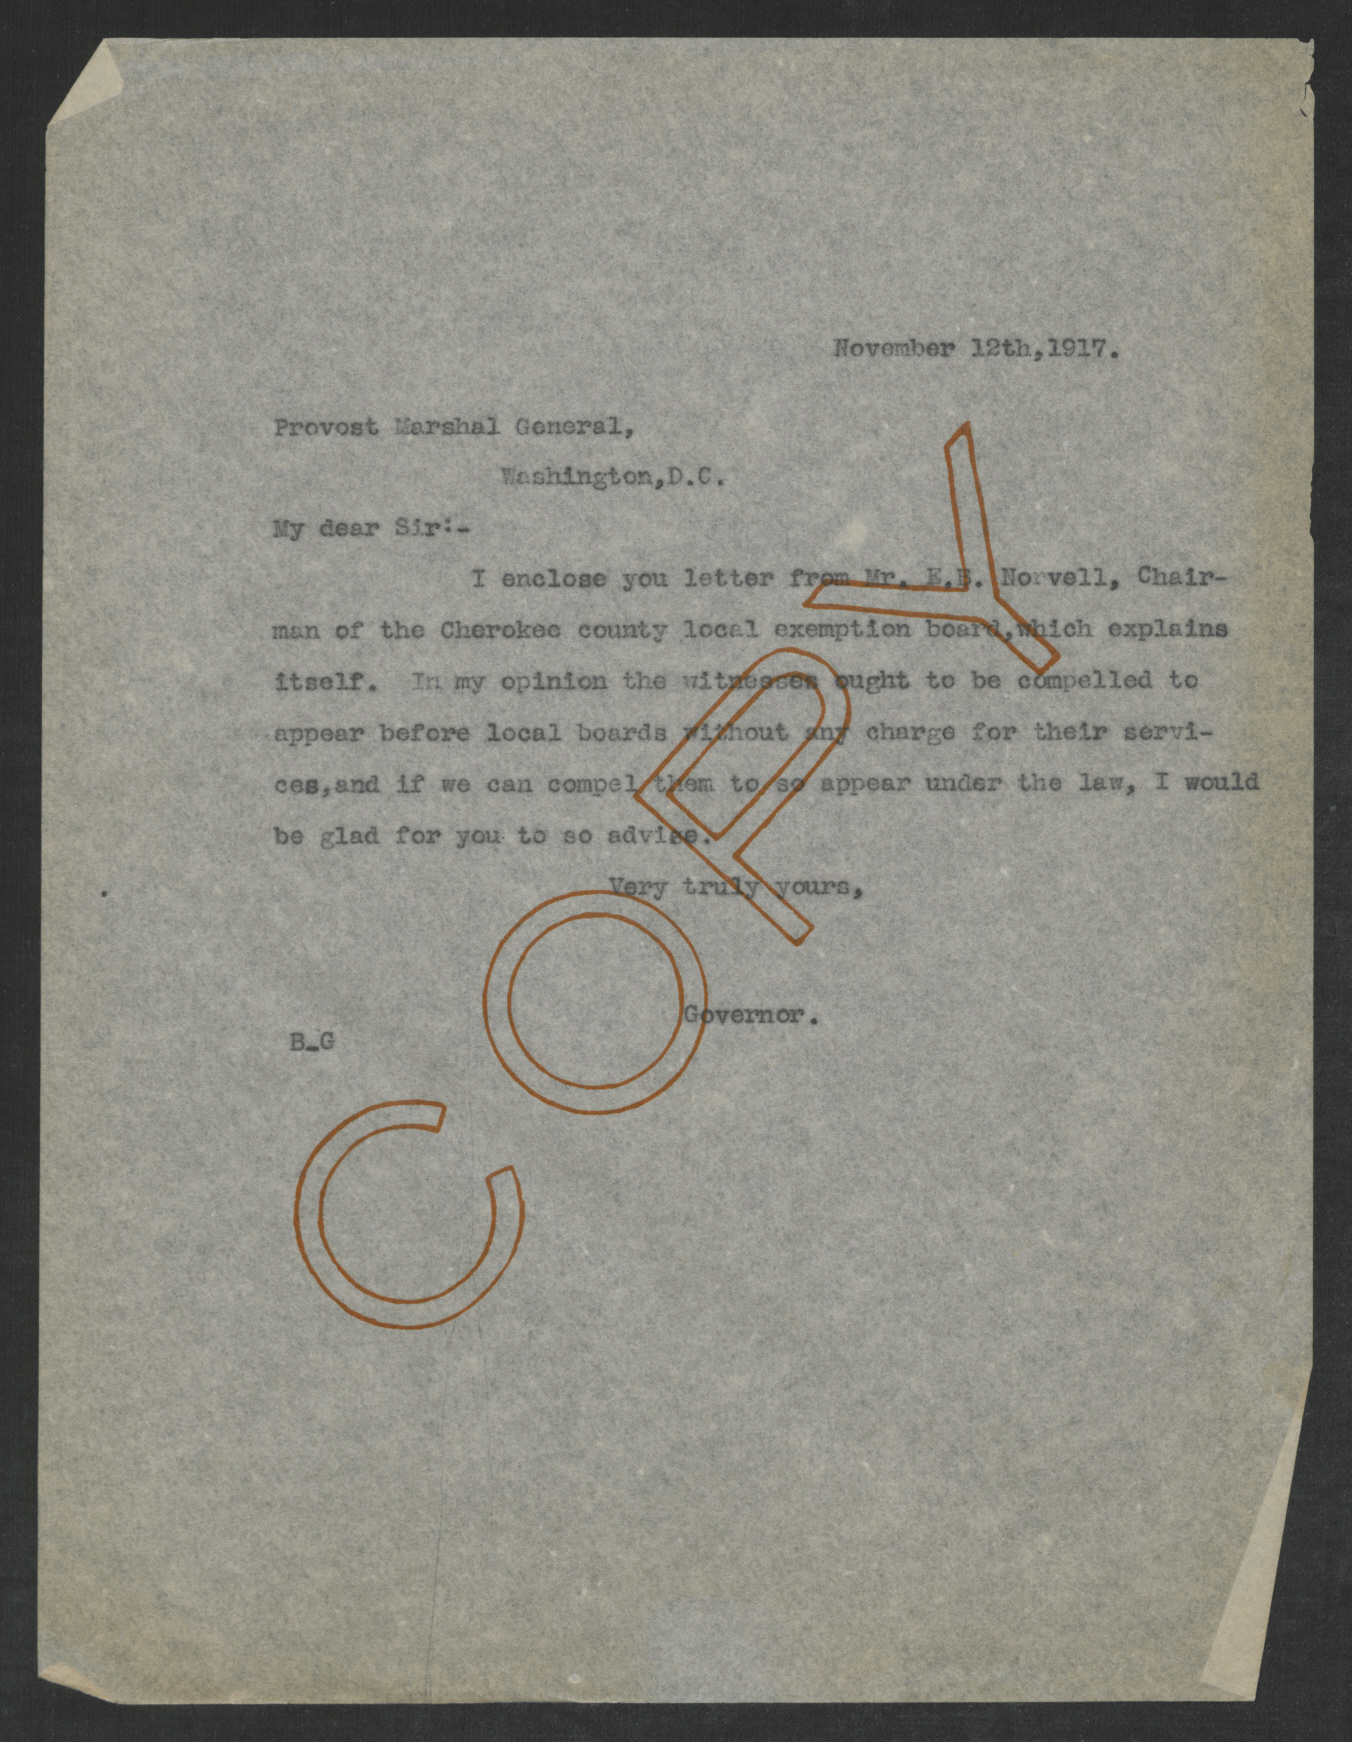 Letter from Thomas W. Bickett to Enoch H. Crowder, November 12, 1917